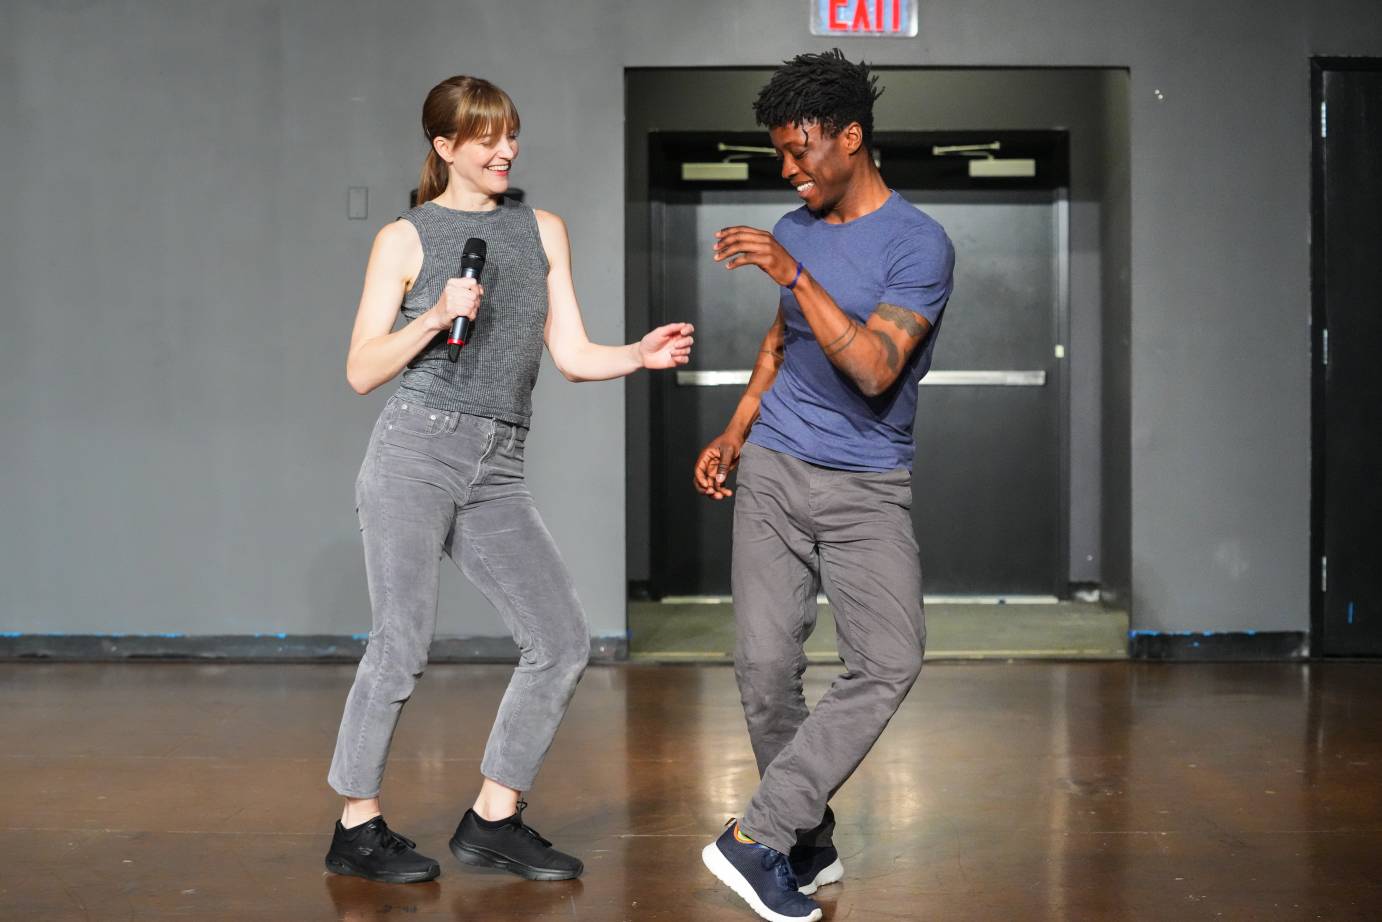 Jamie Scott, a white woman with red hair and Mufutau Yusuf, a Black man with black hair smile and appear to be in the midst of a jitter bug dance. She is dressed in all grey with black sneakers, he in a blue shirt and gray pants with black sneakers. The setting is casual.  